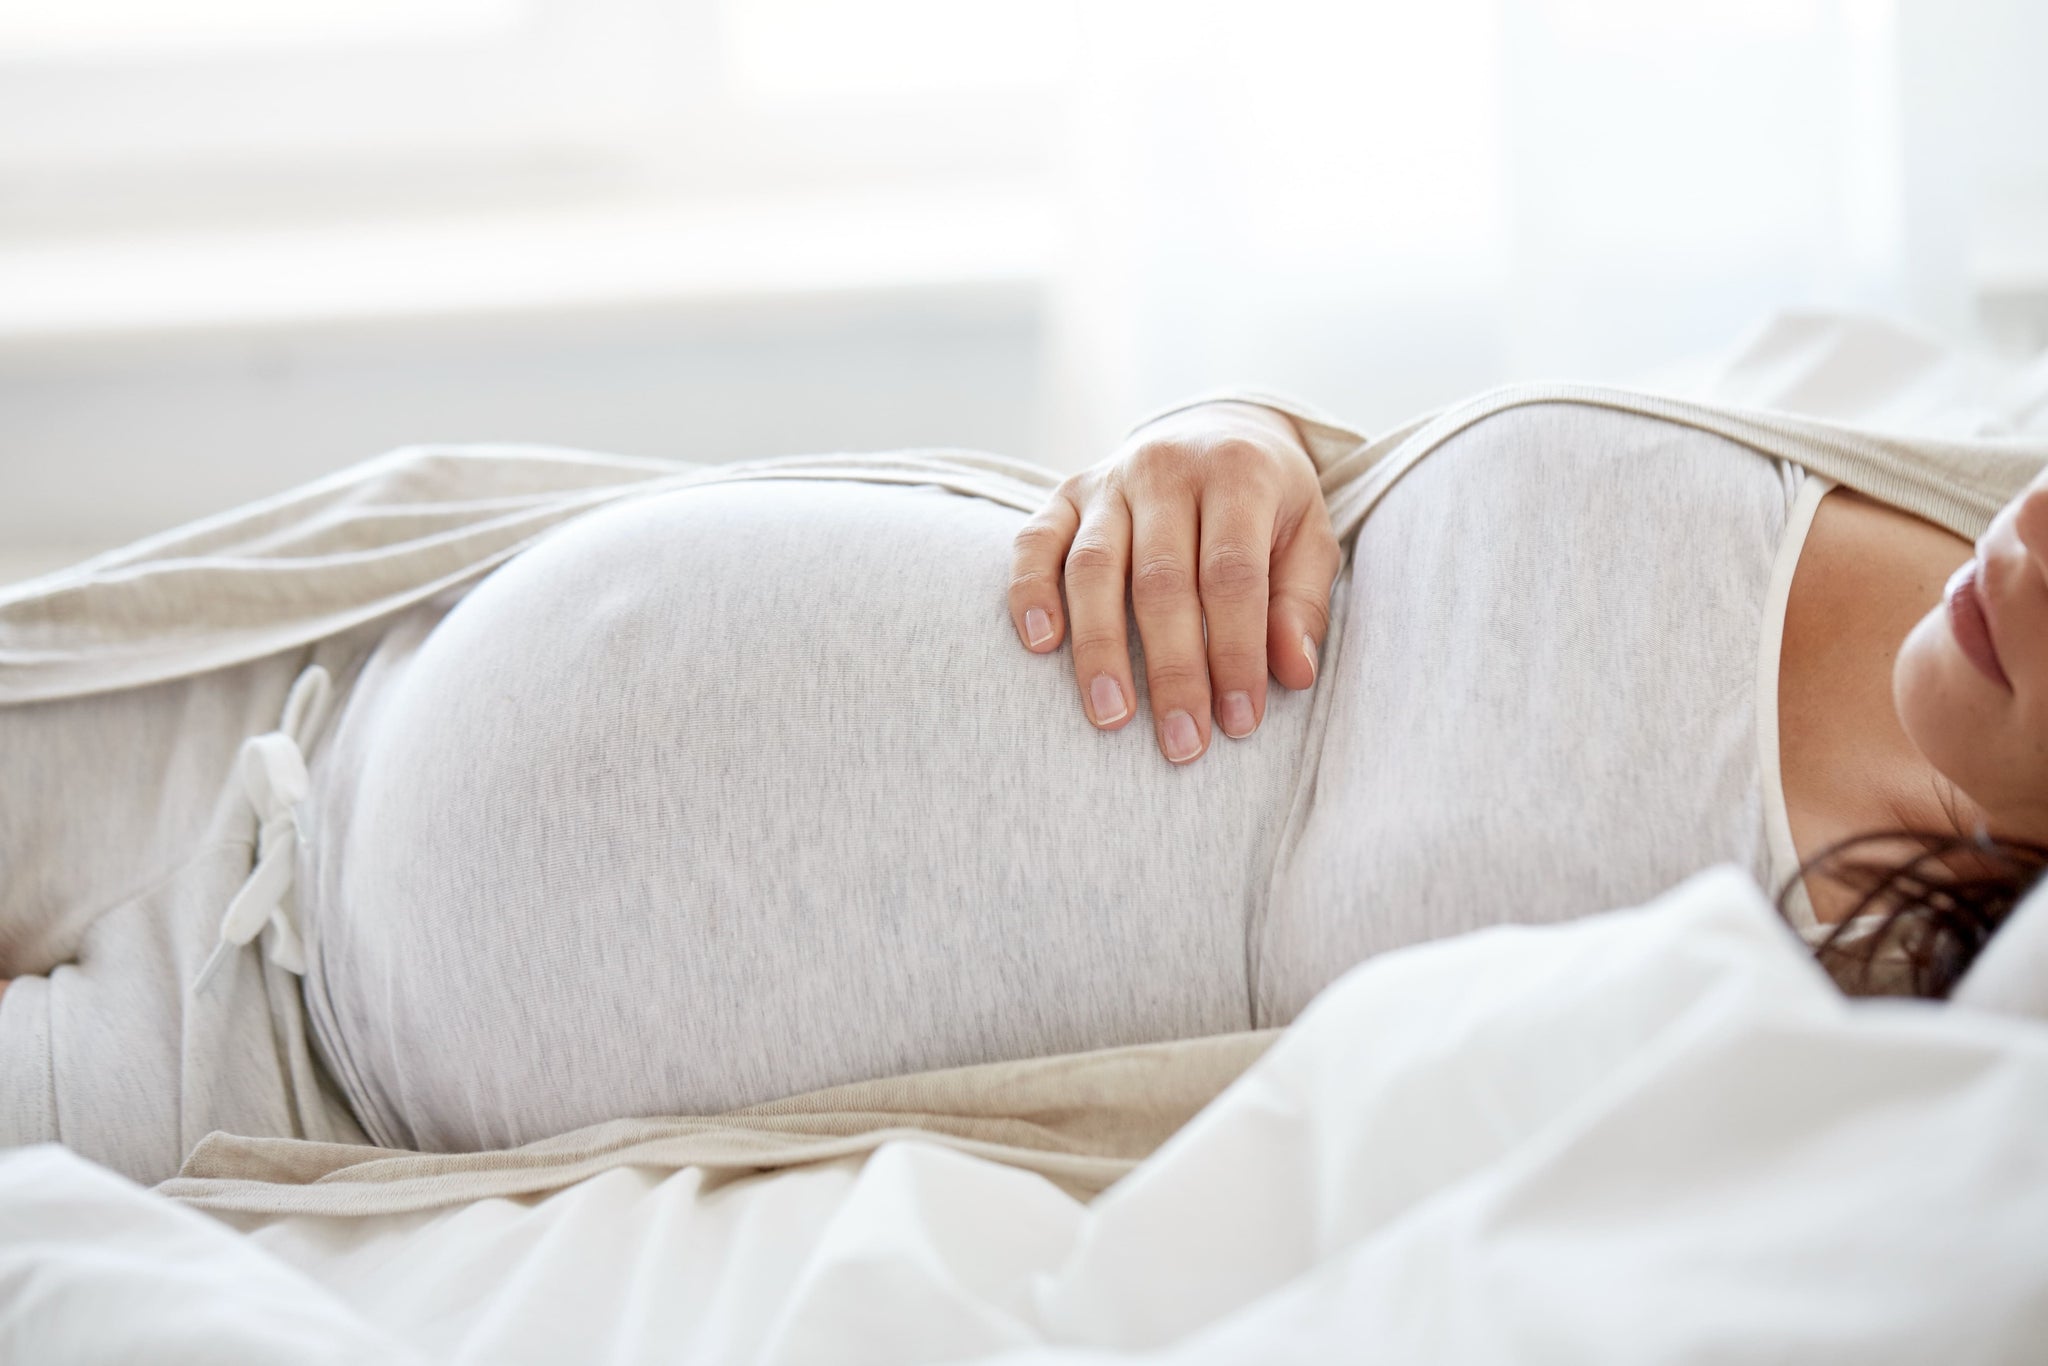 Tips to get a better night's sleep while pregnant